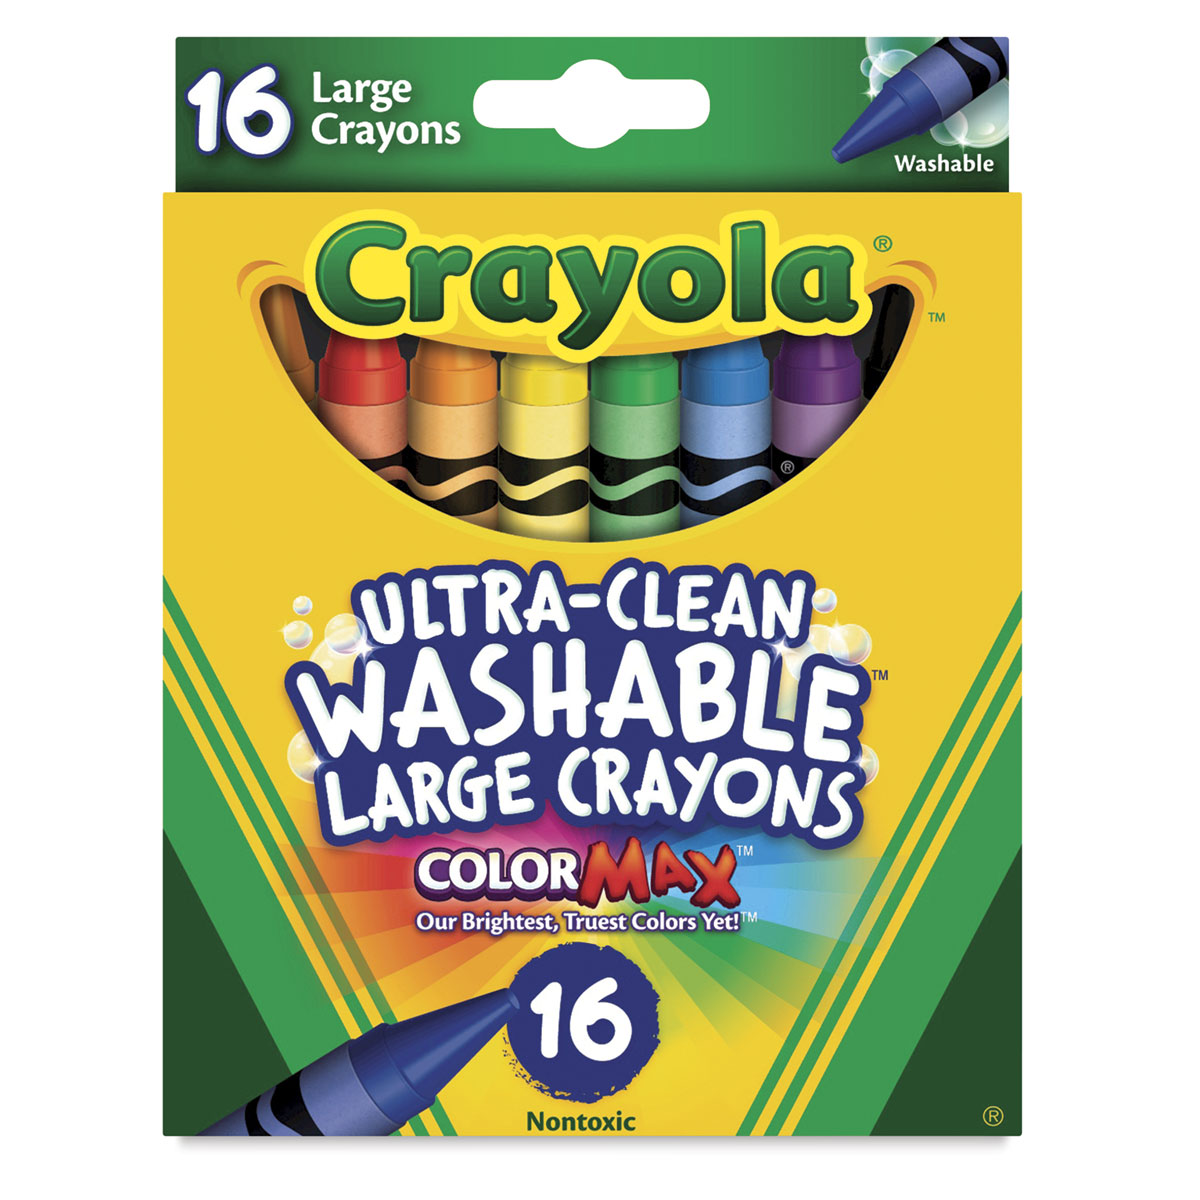 Crayola Large Washable Crayons, 16 Ct, School Supplies for Kindergarten, Toddler Crayons - image 1 of 4